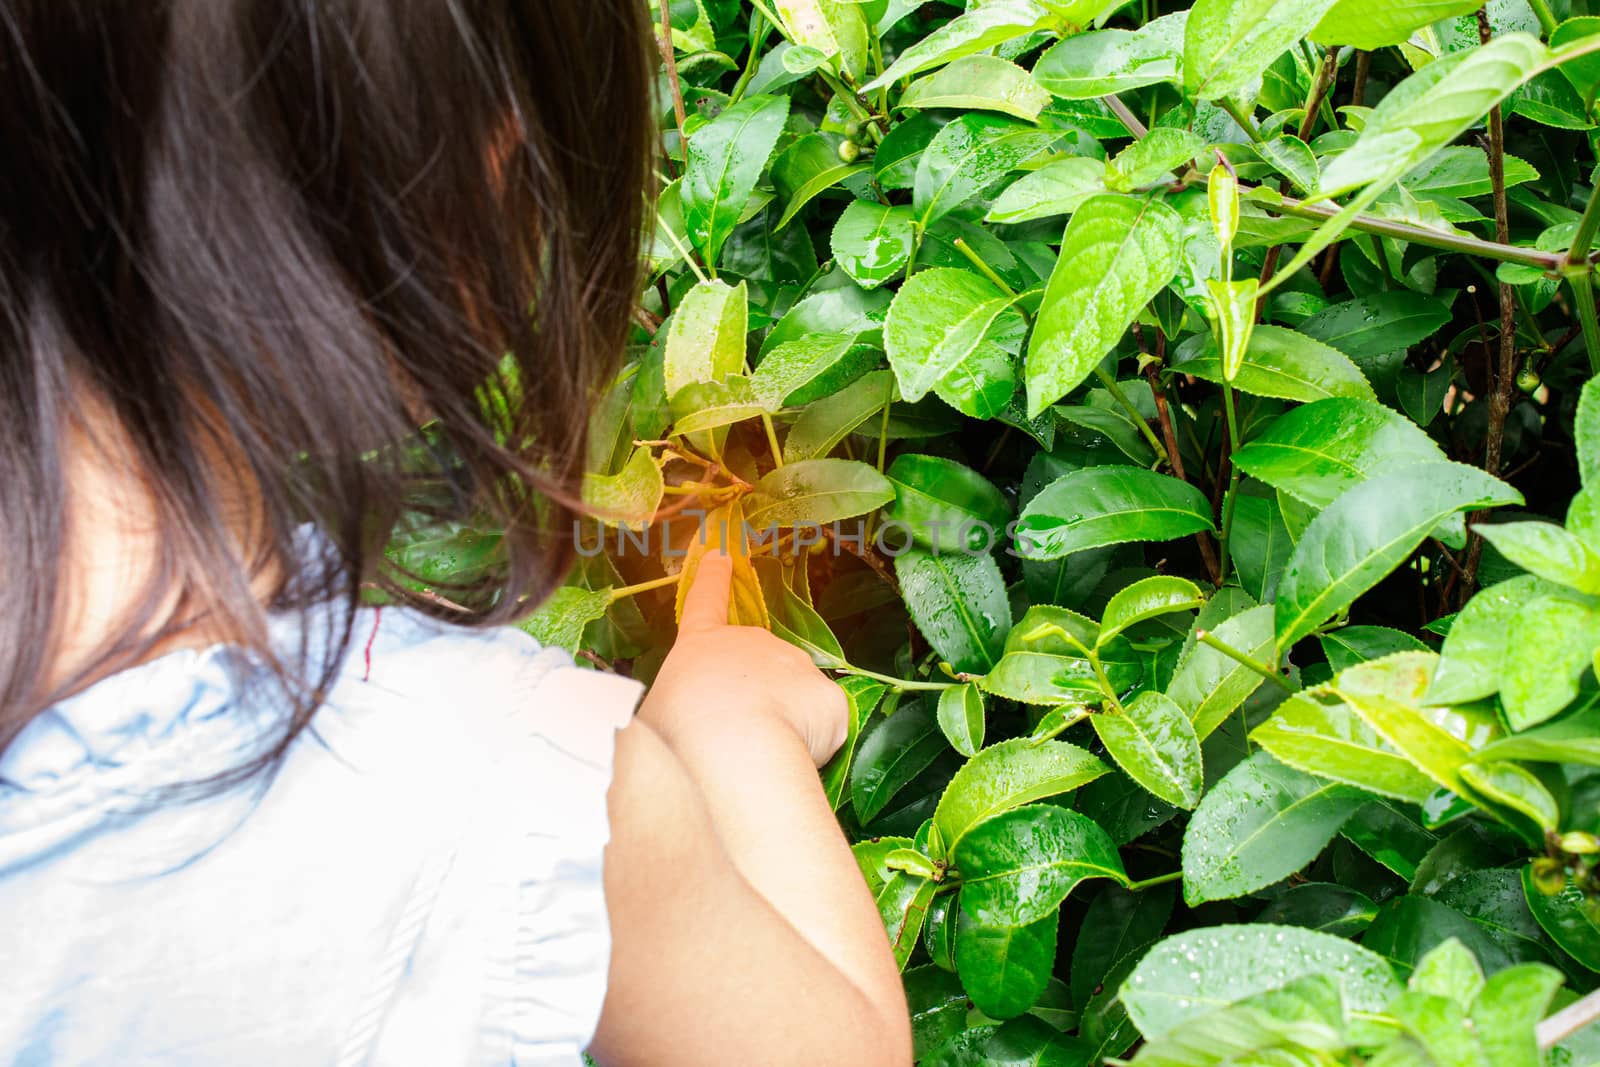 Portrait of little asian girl picking tea leaves at a tea plantation and the insect bites her hand.